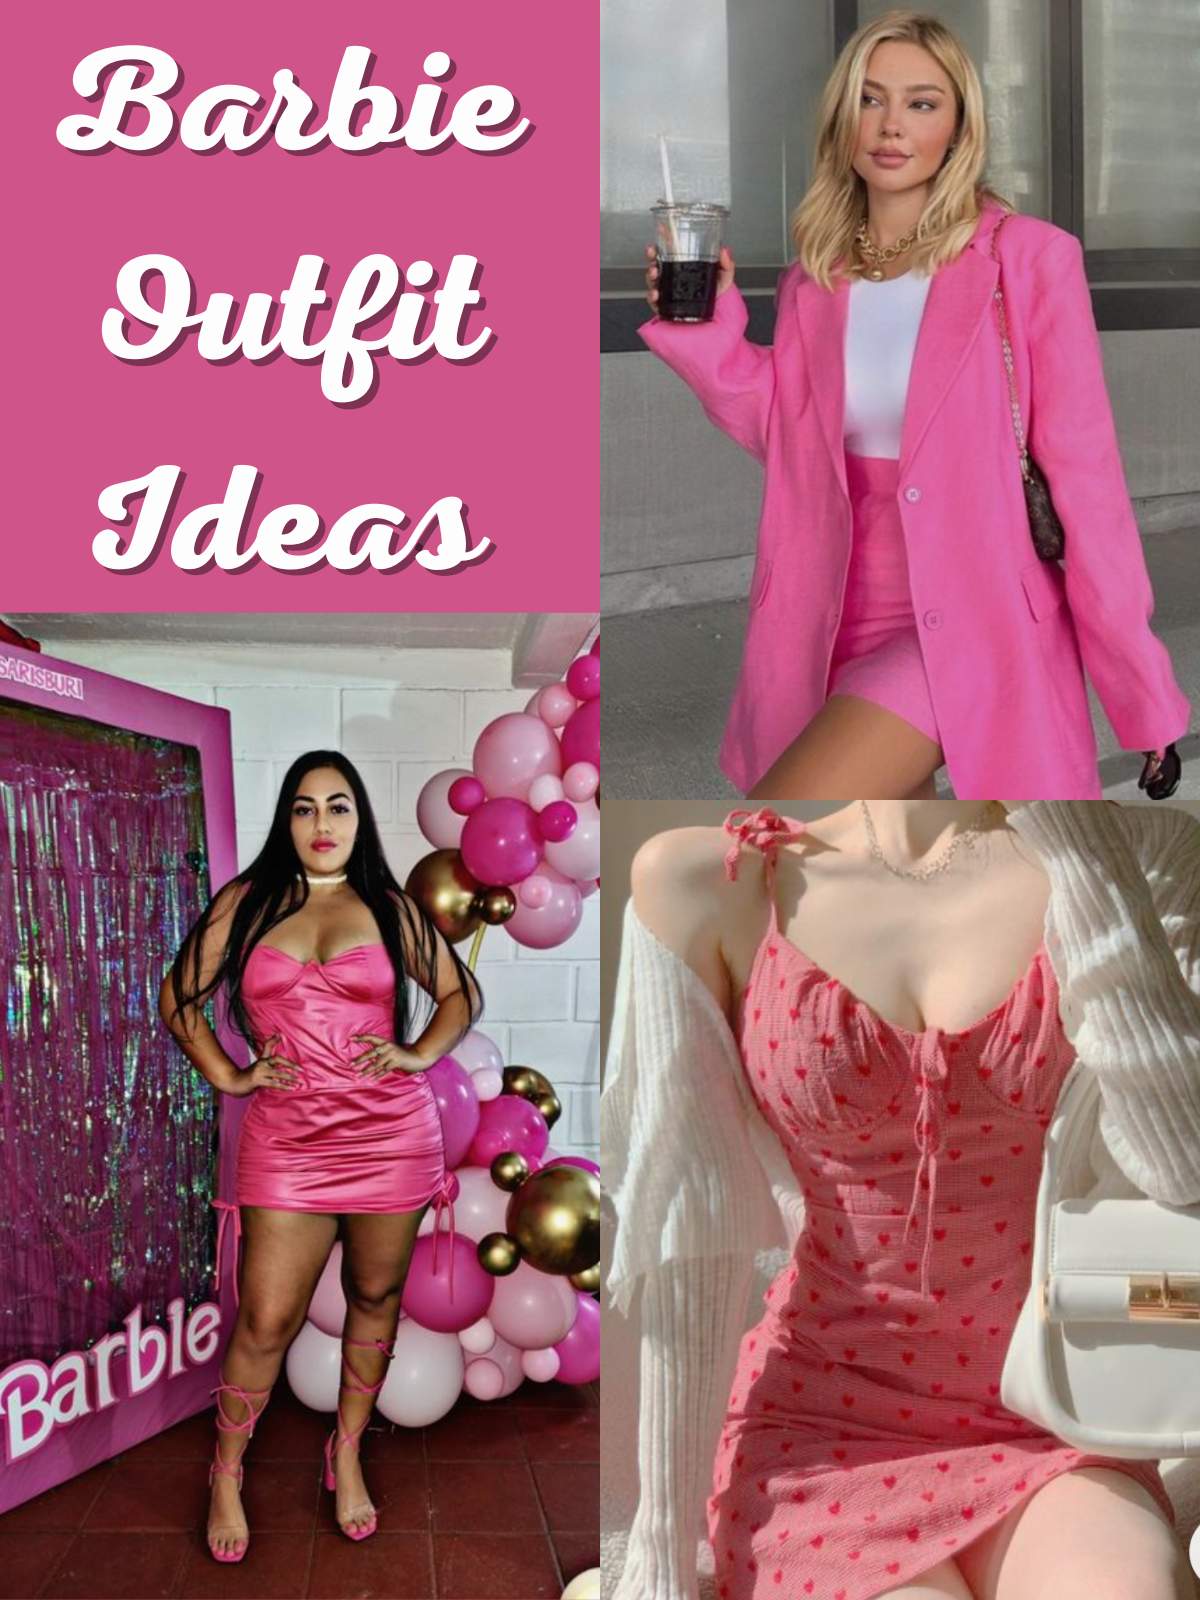 Cute pink themed outfits. 3 different examples of different styles.